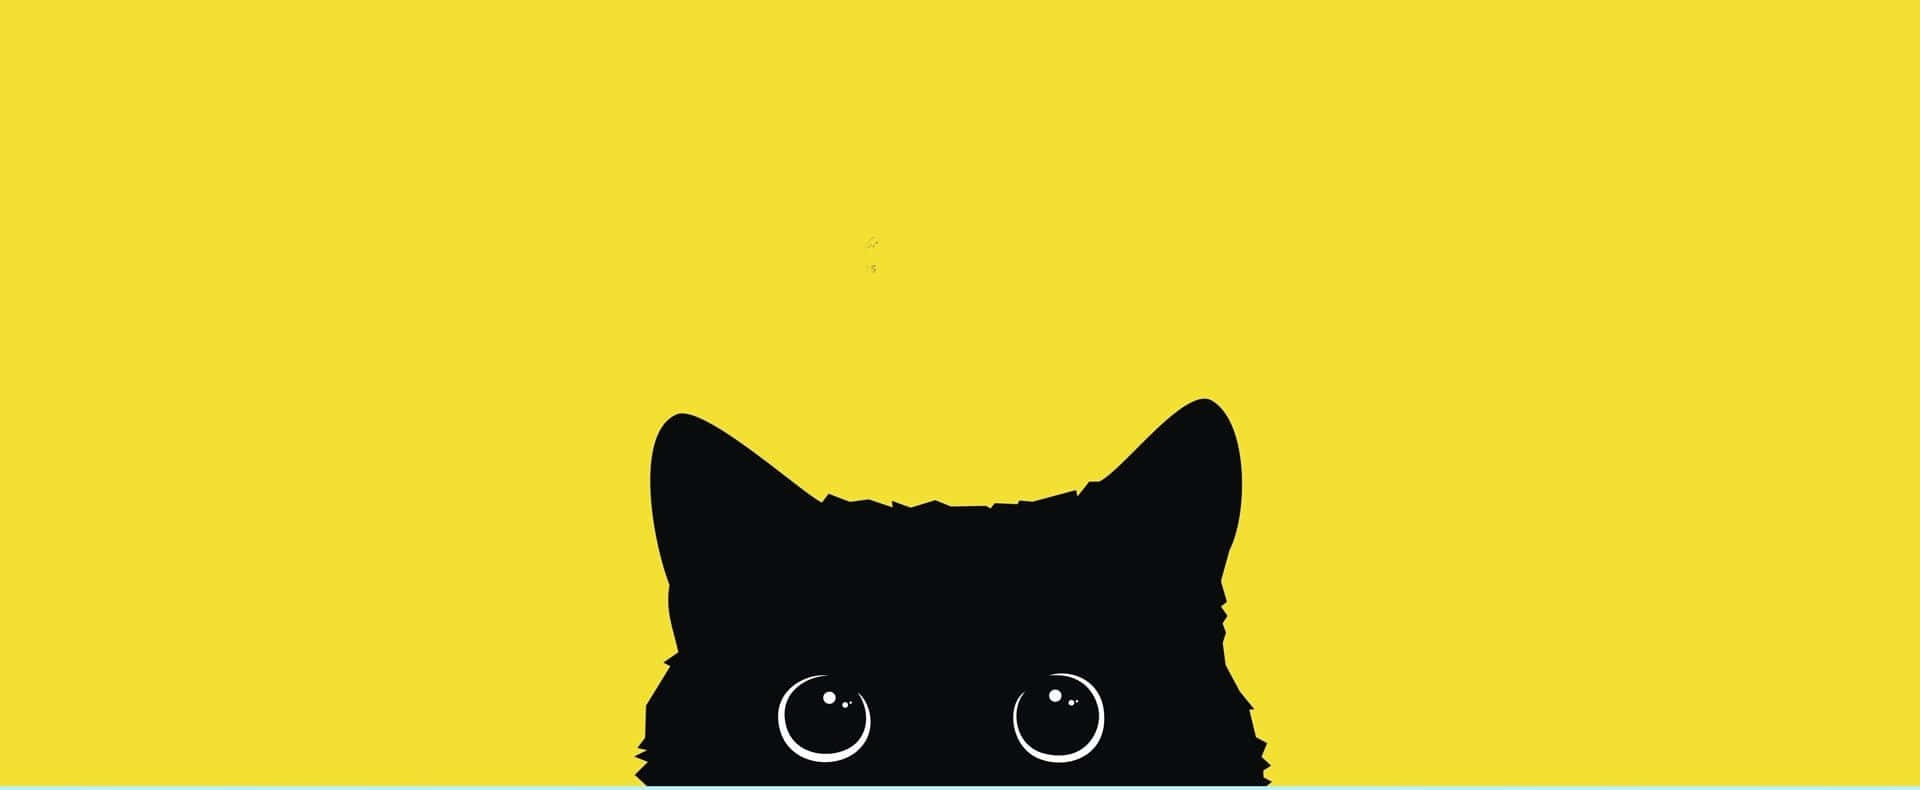 A Black Cat With Eyes On A Yellow Background Wallpaper